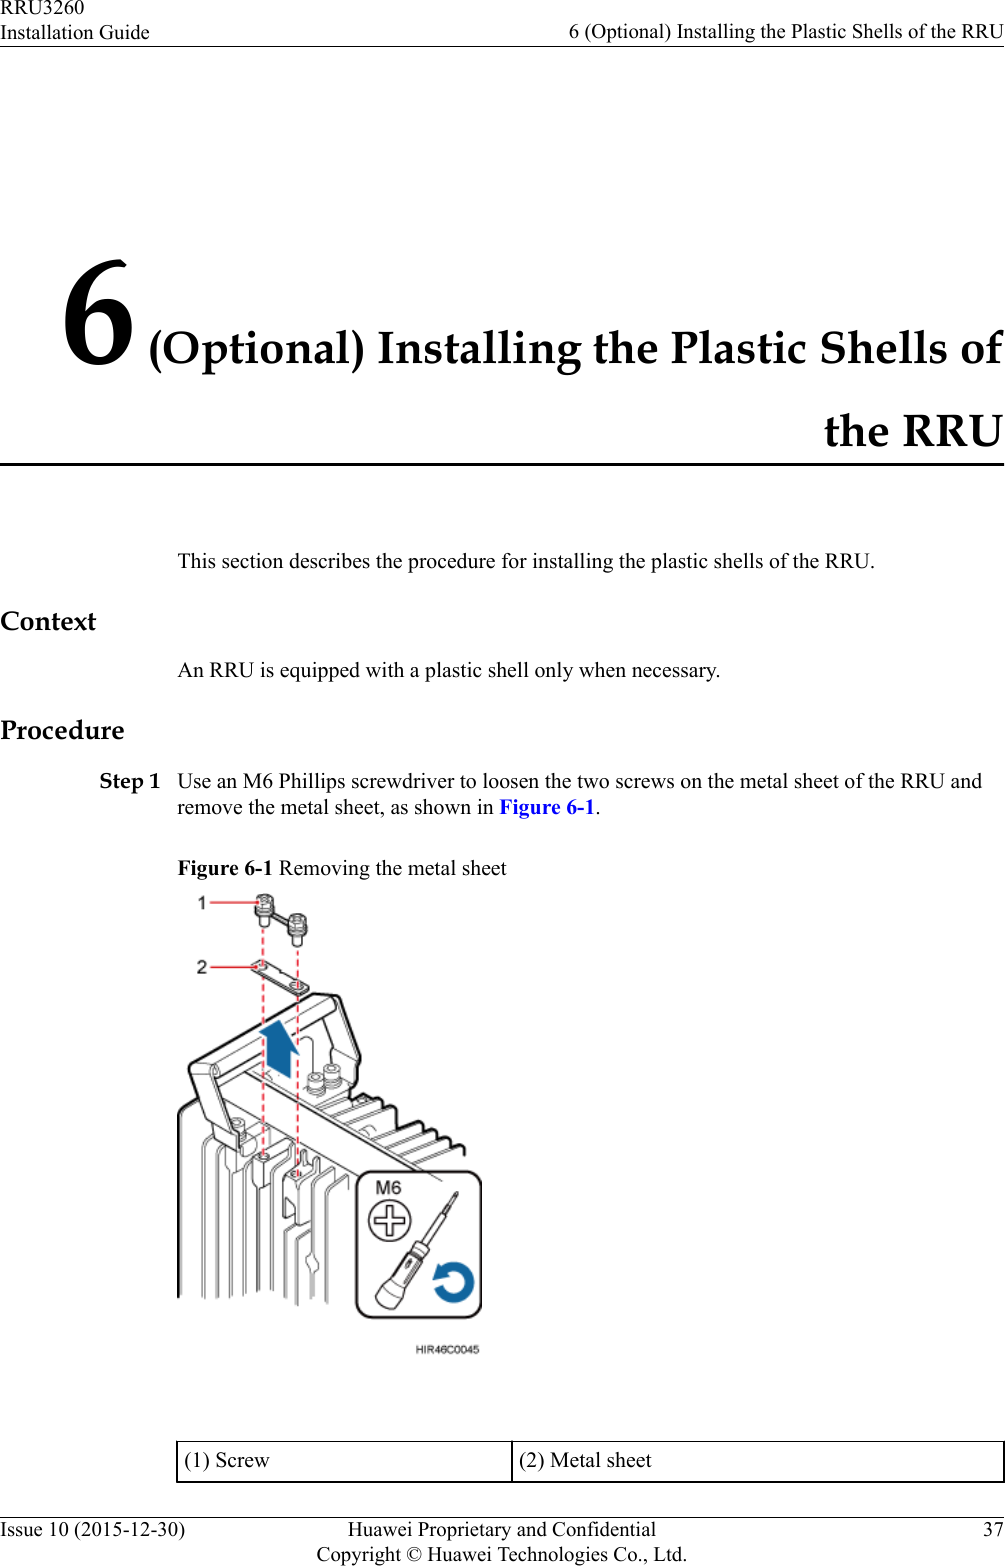 6 (Optional) Installing the Plastic Shells ofthe RRUThis section describes the procedure for installing the plastic shells of the RRU.ContextAn RRU is equipped with a plastic shell only when necessary.ProcedureStep 1 Use an M6 Phillips screwdriver to loosen the two screws on the metal sheet of the RRU andremove the metal sheet, as shown in Figure 6-1.Figure 6-1 Removing the metal sheet (1) Screw (2) Metal sheetRRU3260Installation Guide 6 (Optional) Installing the Plastic Shells of the RRUIssue 10 (2015-12-30) Huawei Proprietary and ConfidentialCopyright © Huawei Technologies Co., Ltd.37